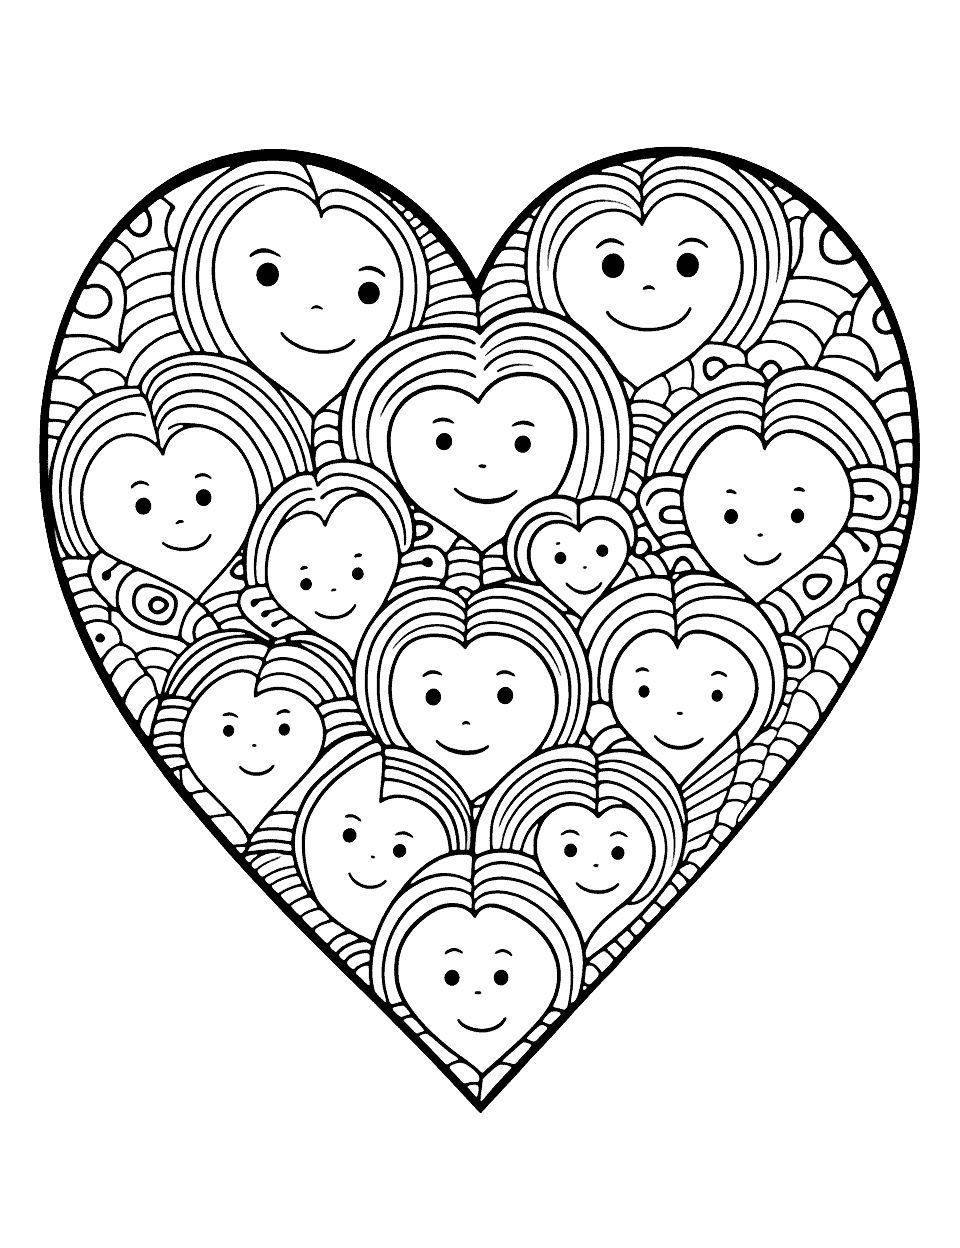 Heart Family Coloring Page - A picture of a family with heart-shaped faces.